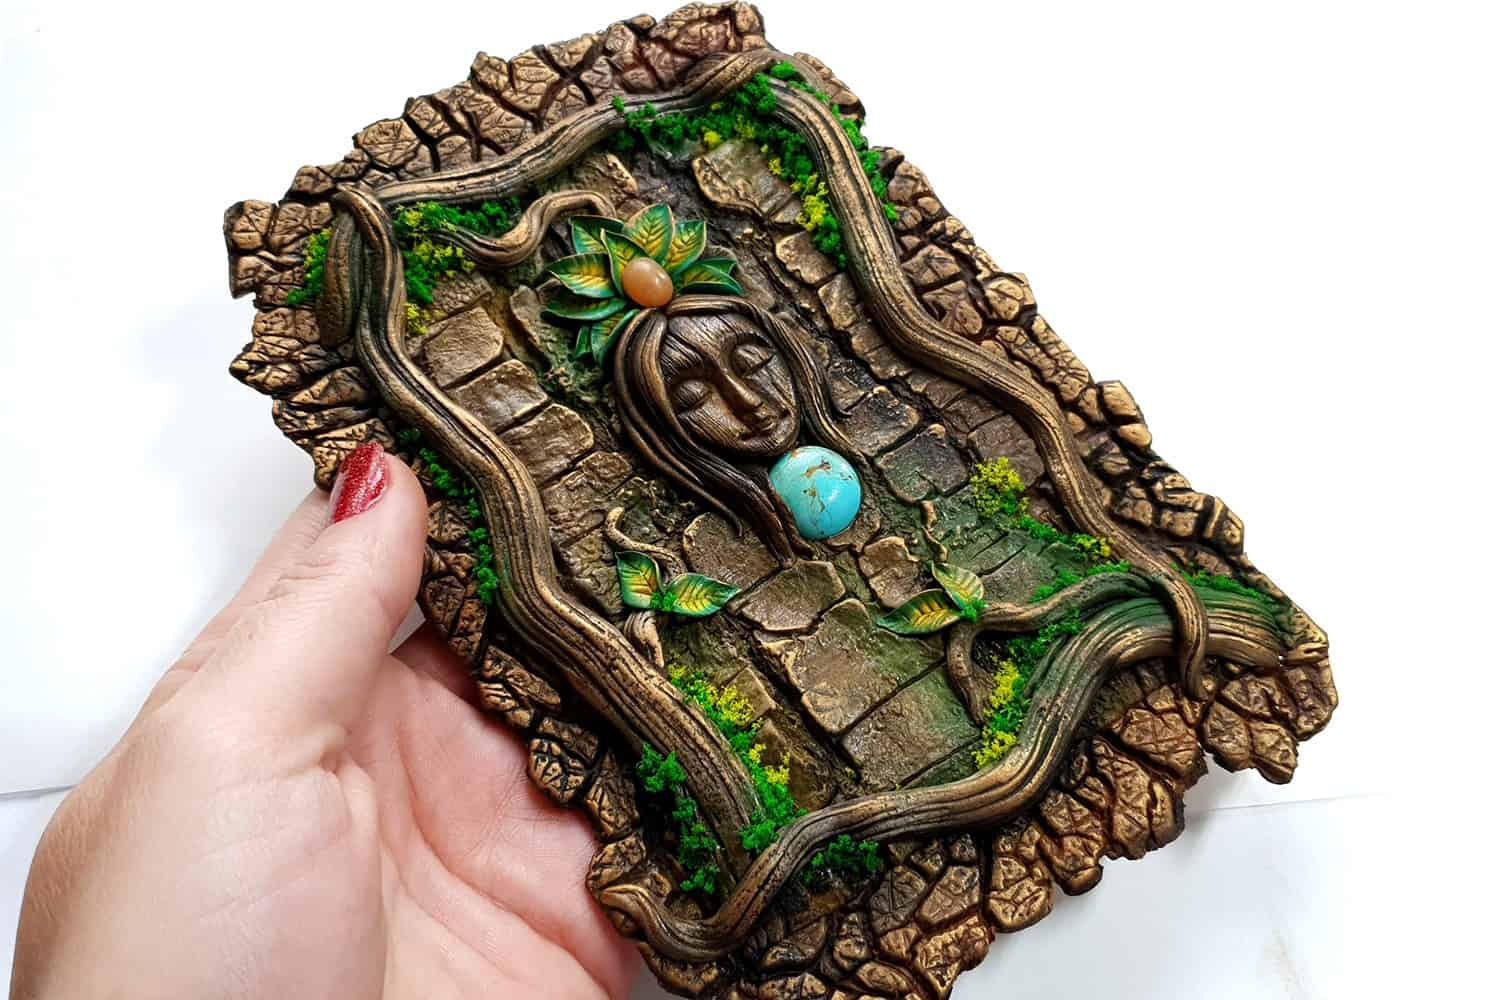 Praying Forest Goddess - Decorative Part for Book Cover #168588